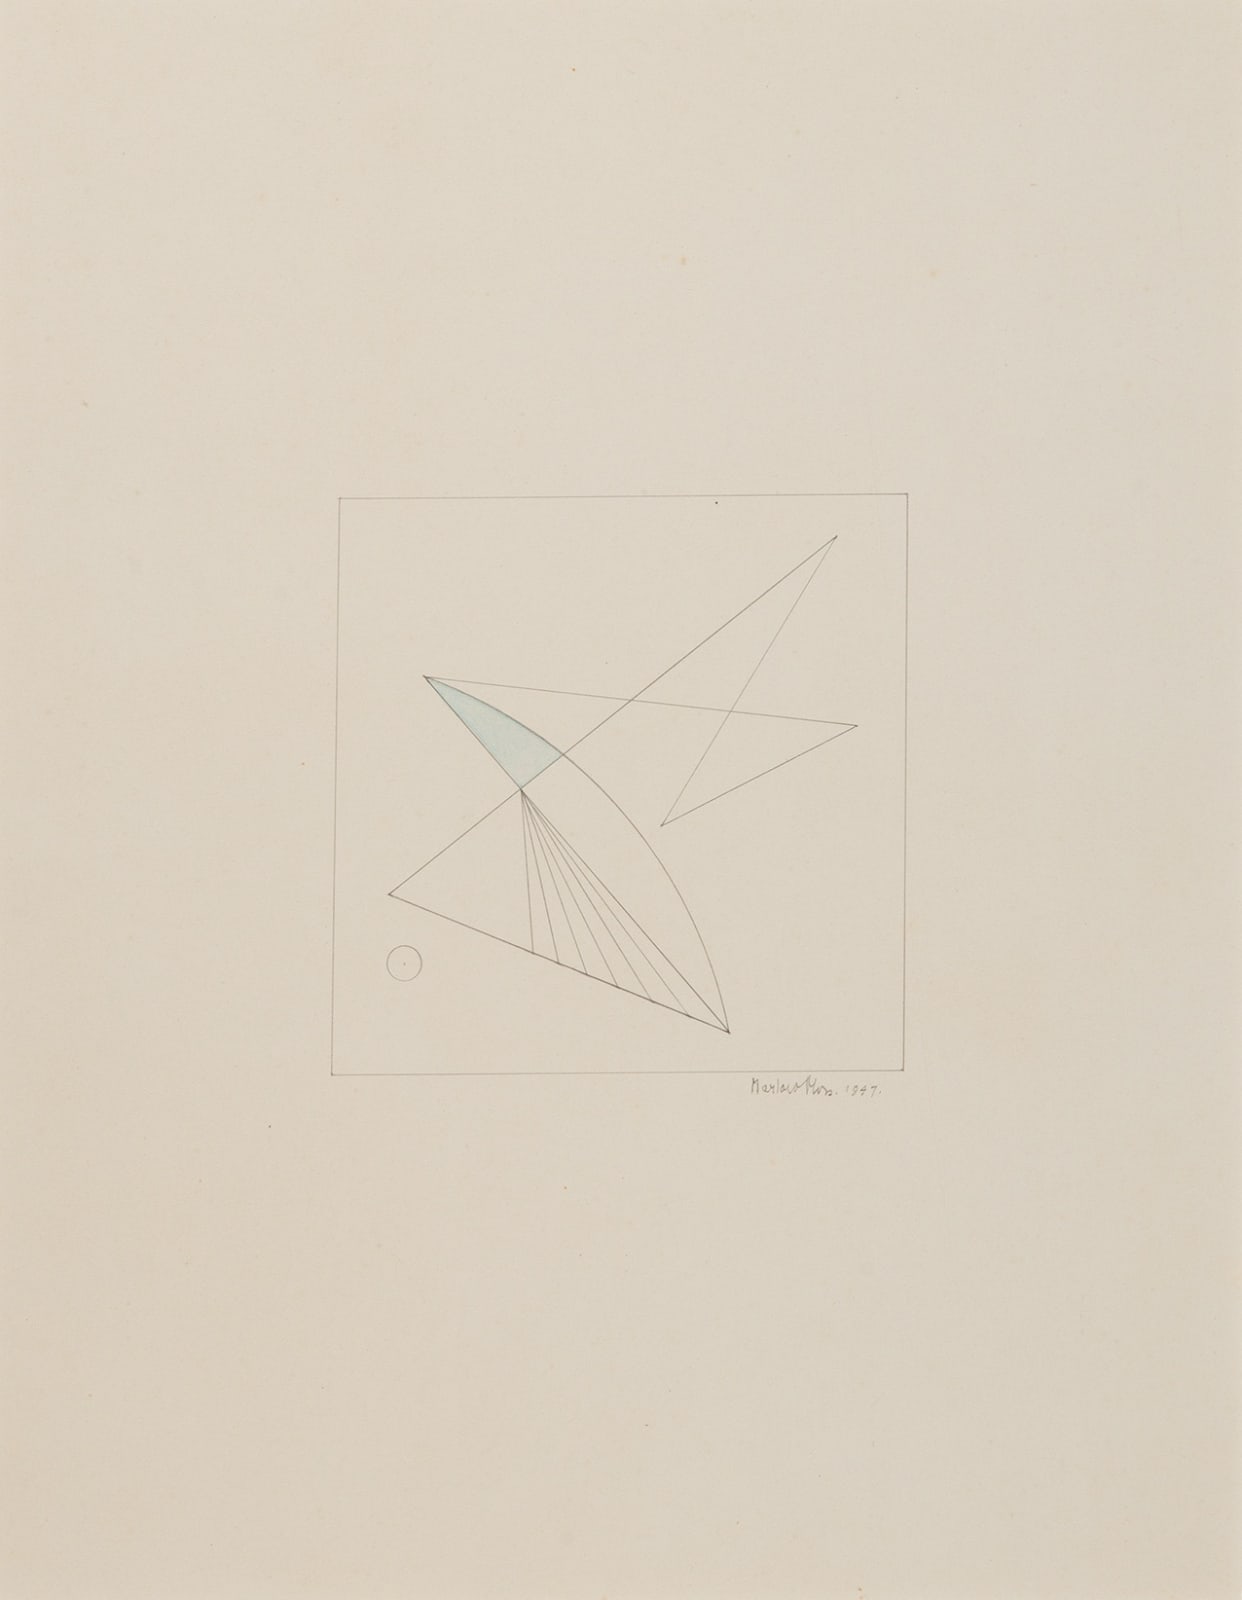 MARLOW MOSS, Untitled (blue triangle), 1947